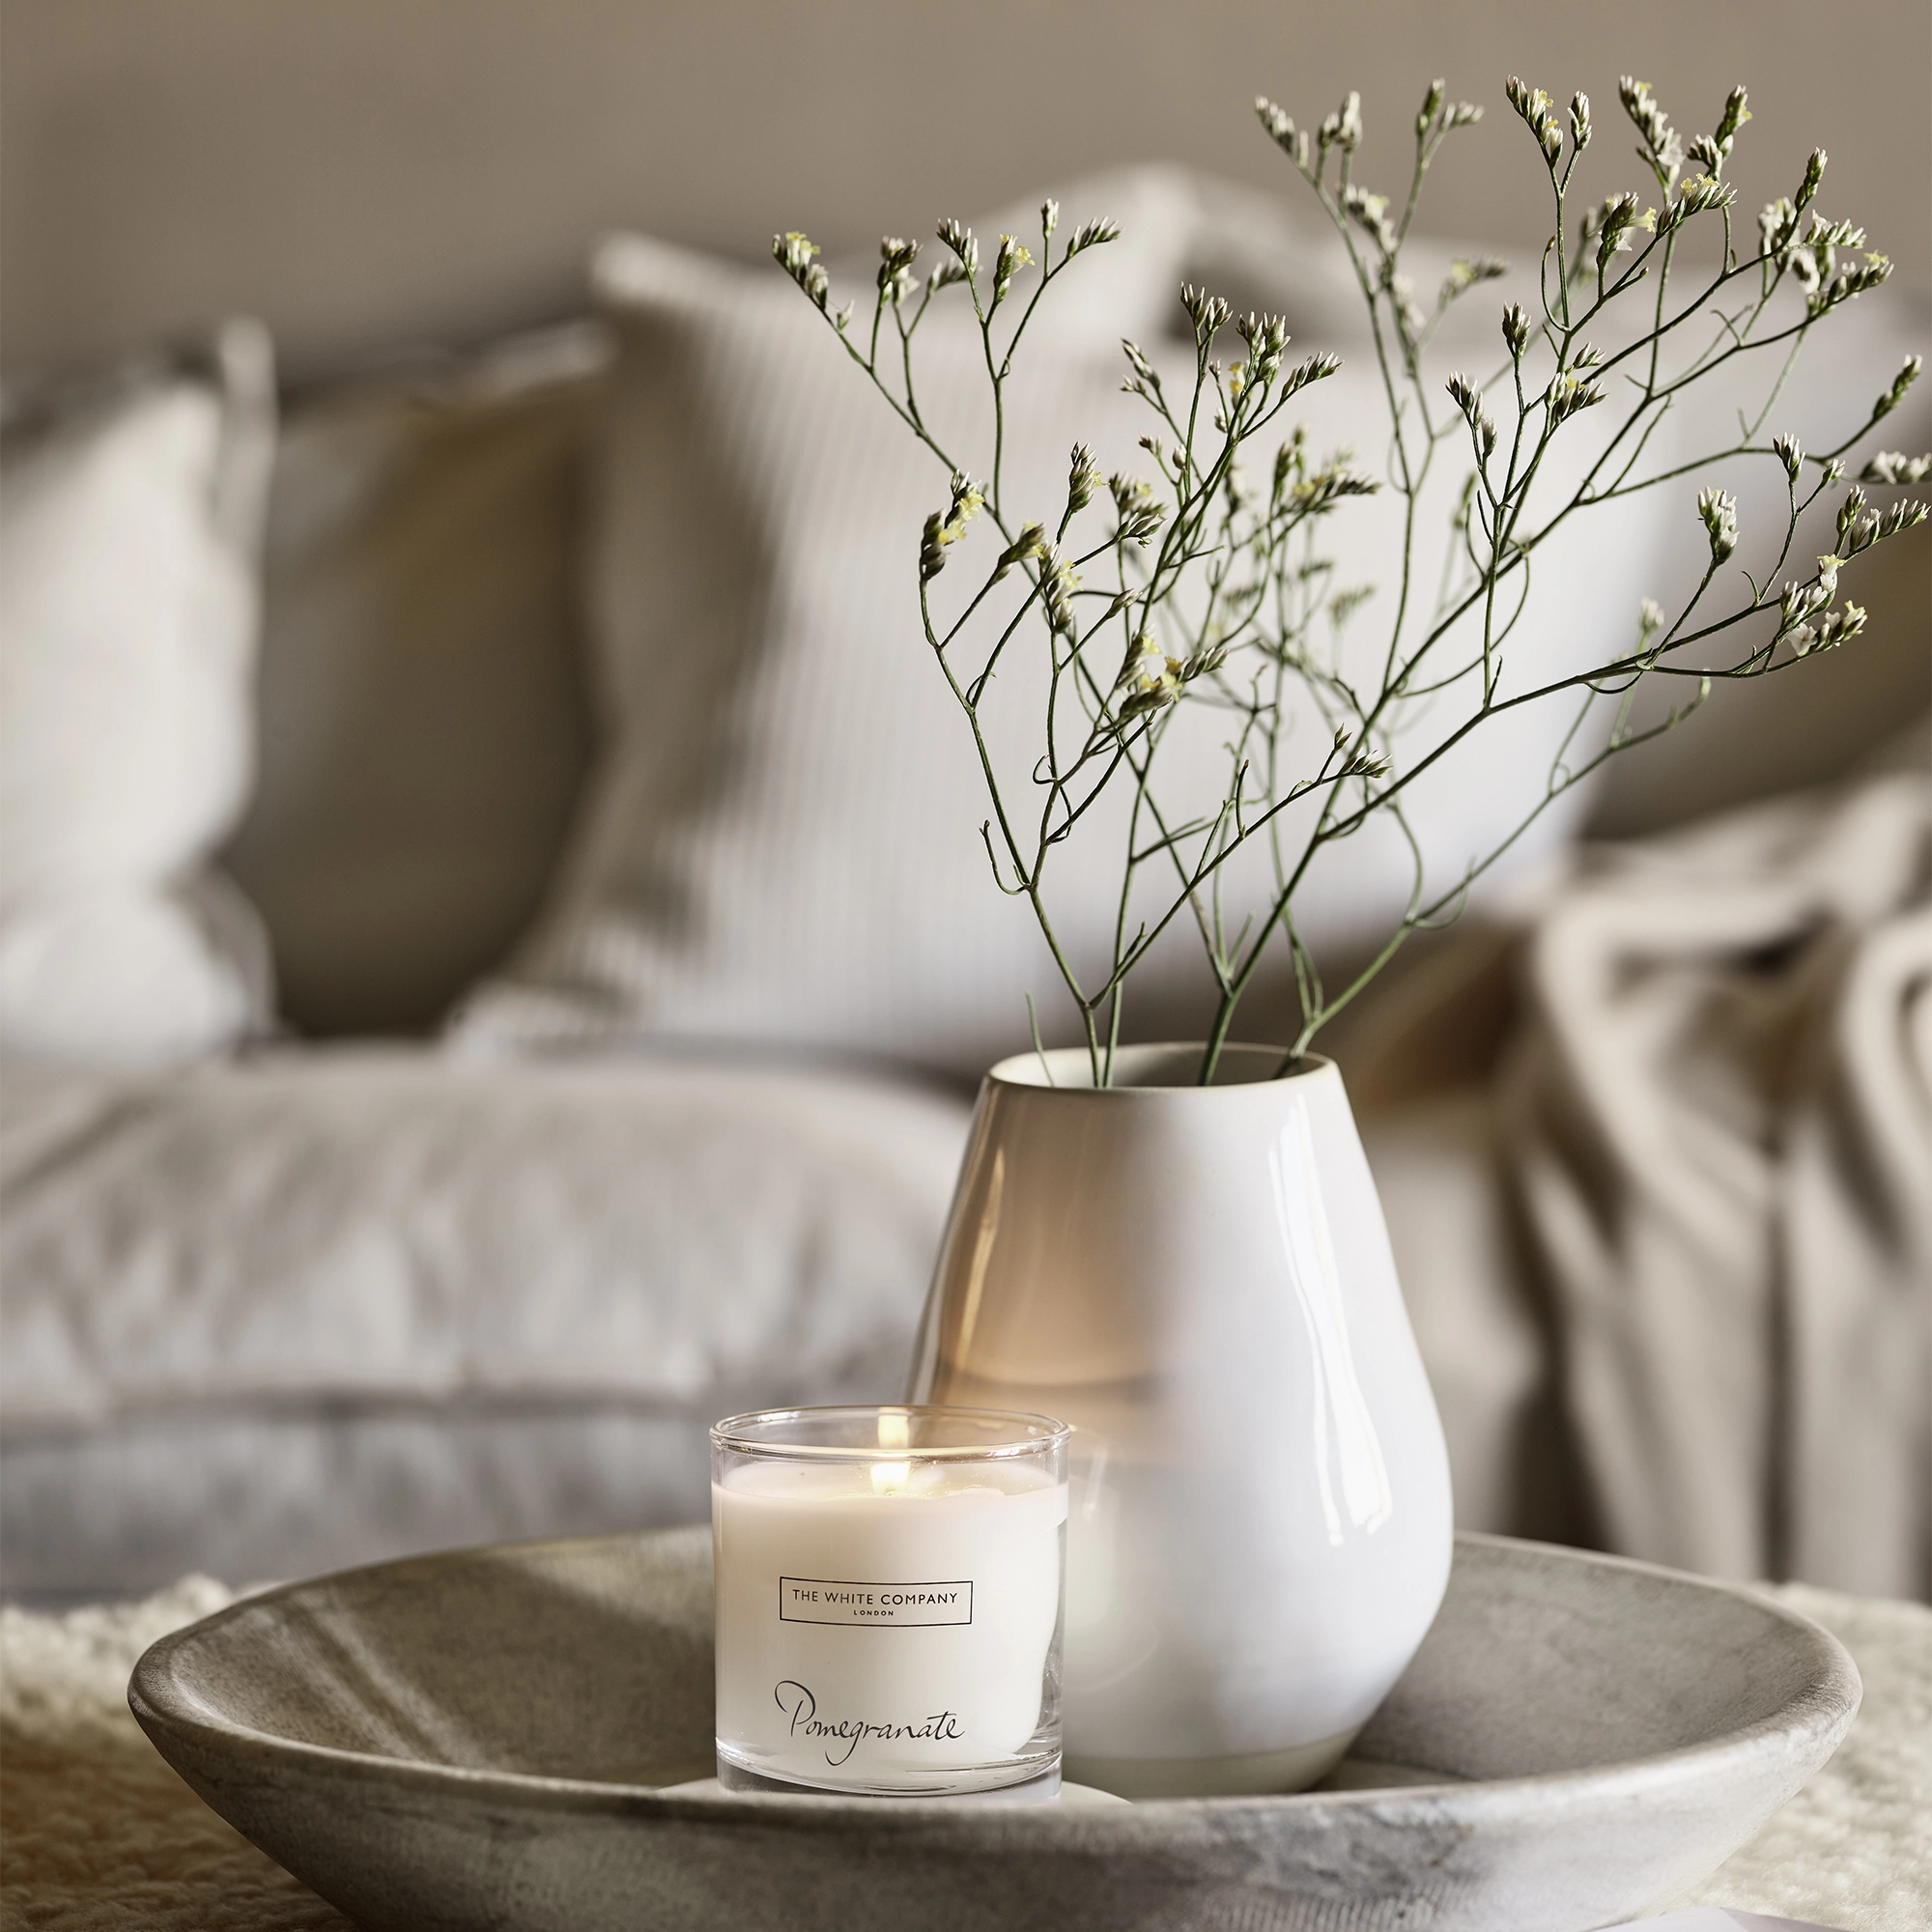 The White Company vase with flowers in and candle stand in grey dish. 